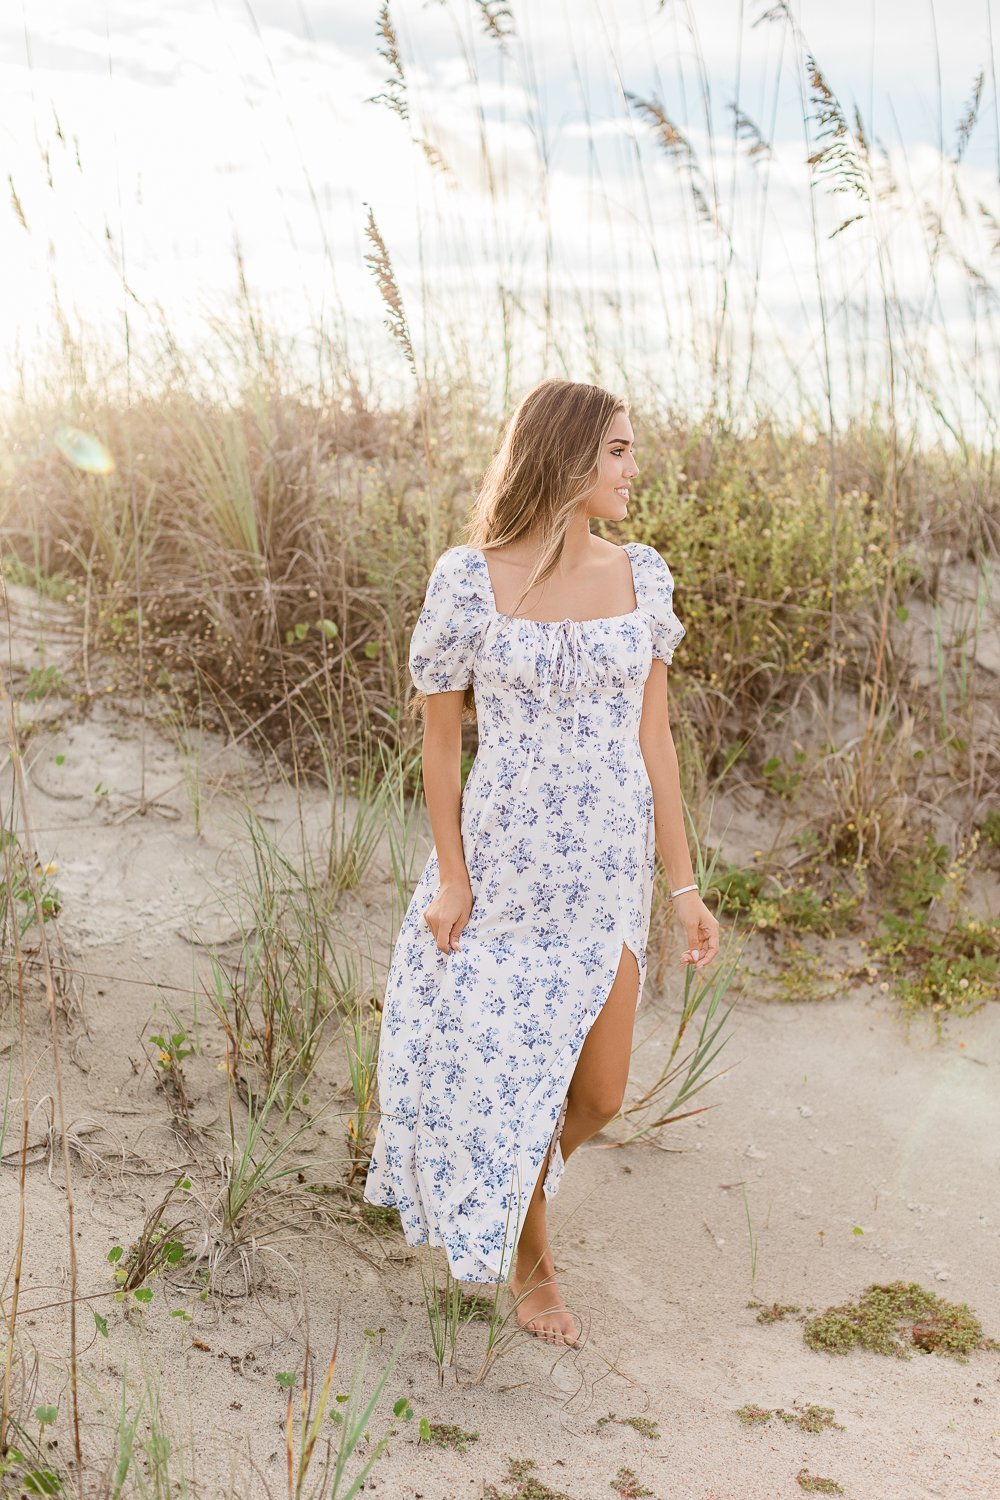 senior photos during sunset with dunes in the background in Anastasia state park